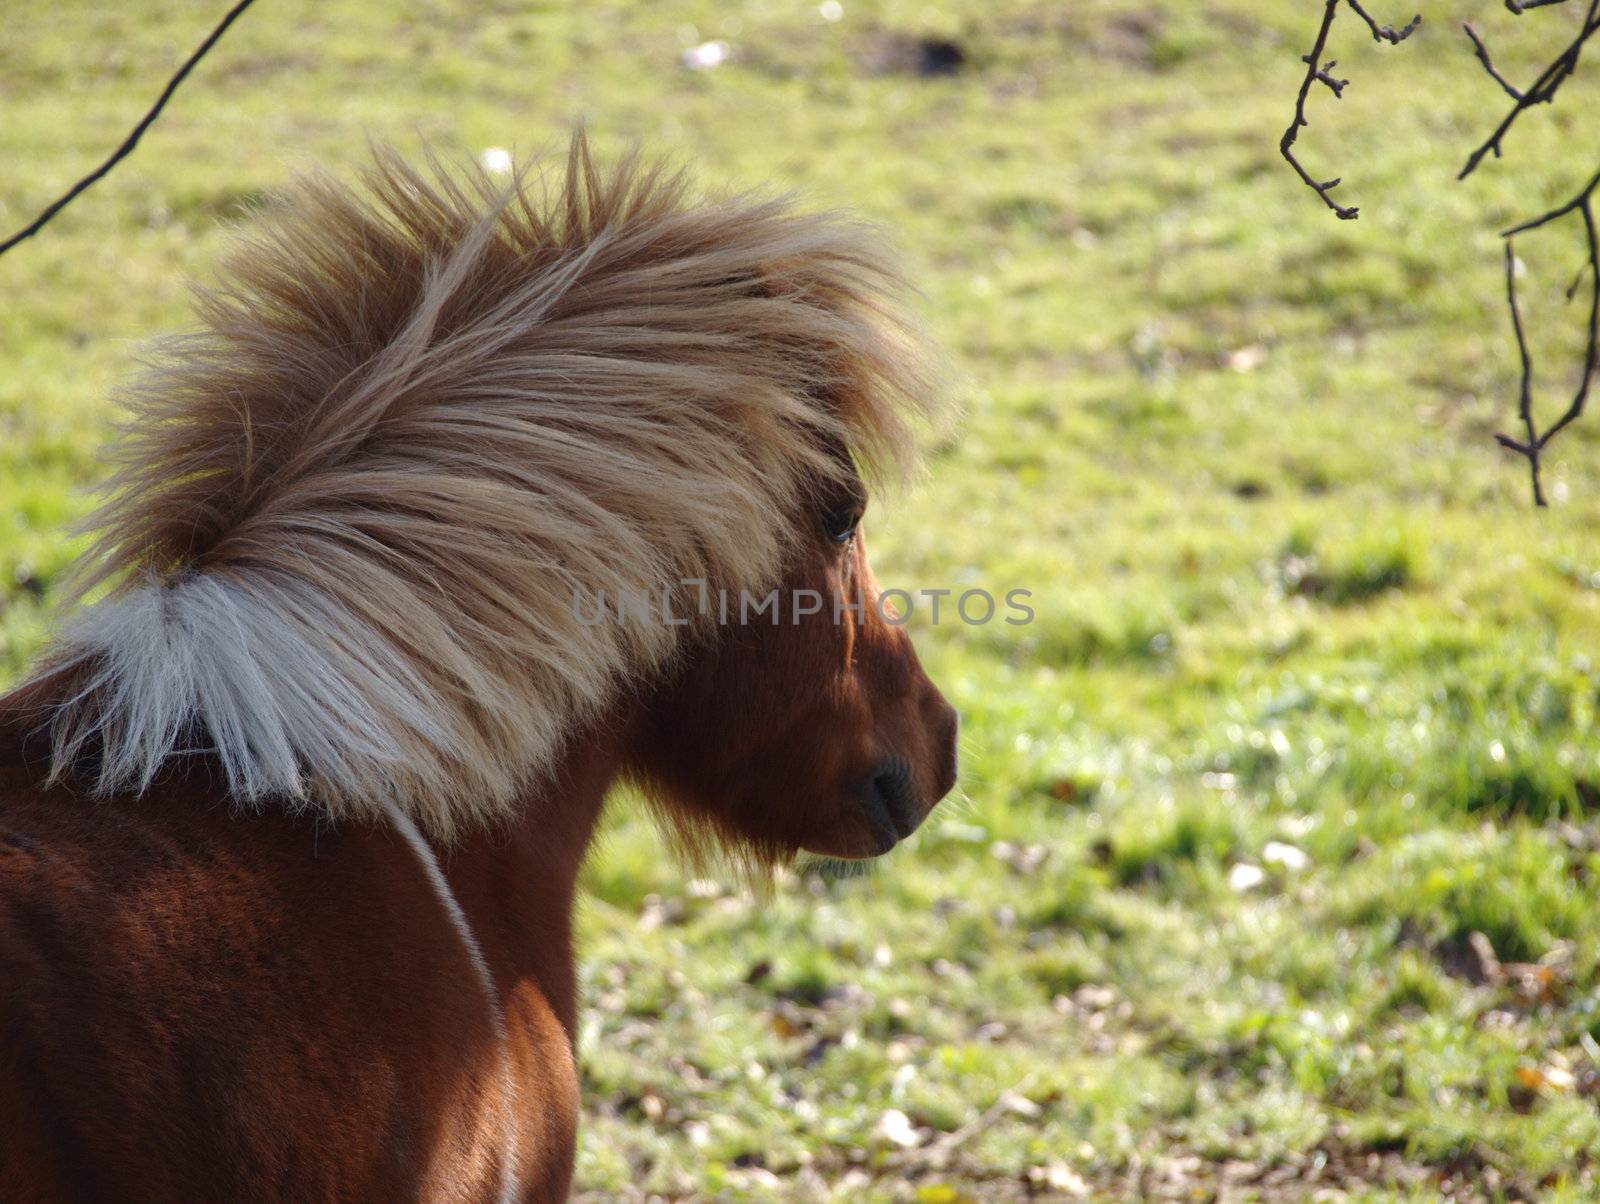 the brown pony with flamboyant blond mane